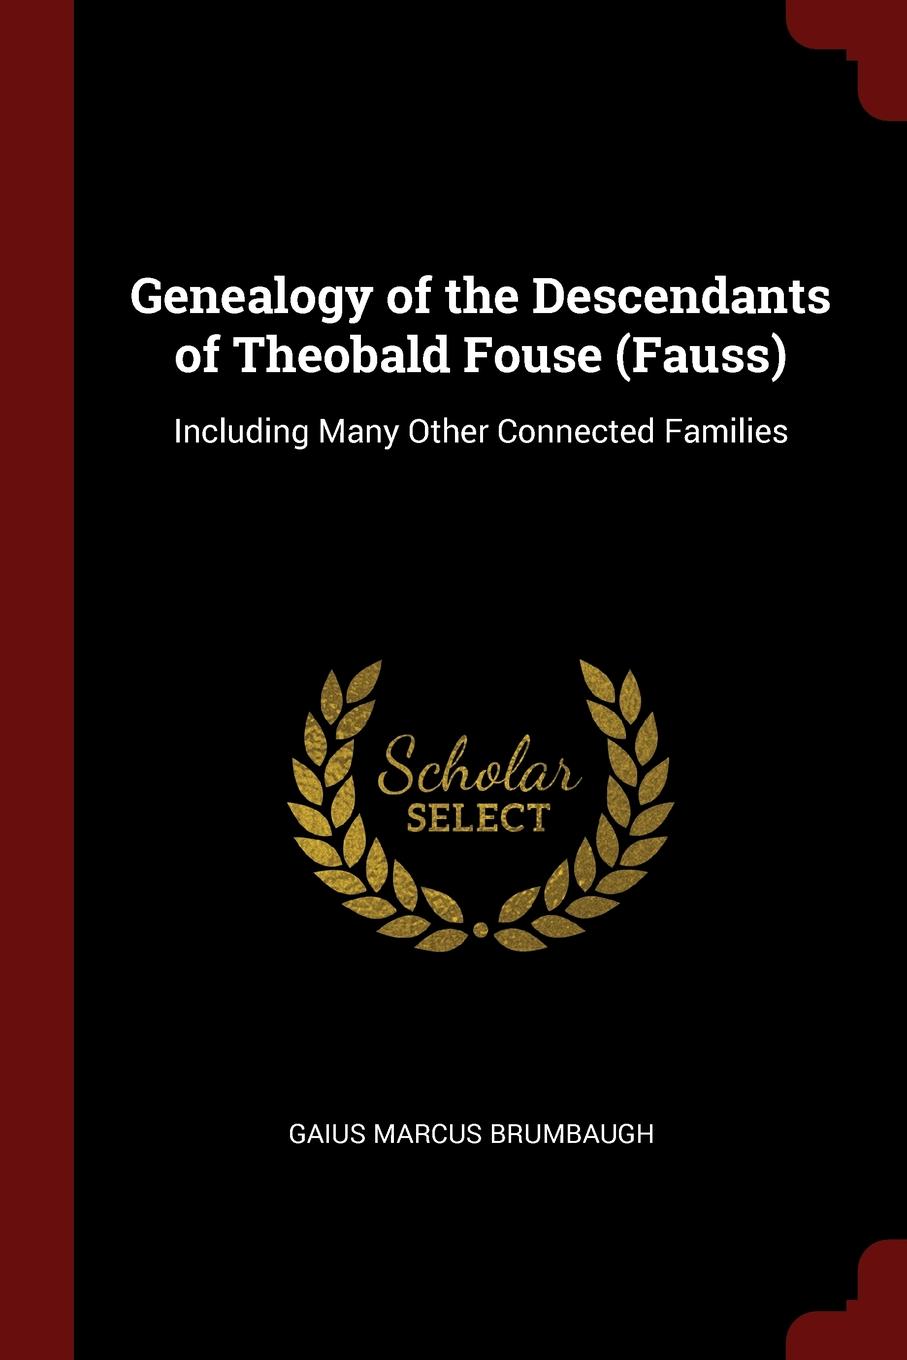 Genealogy of the Descendants of Theobald Fouse (Fauss). Including Many Other Connected Families